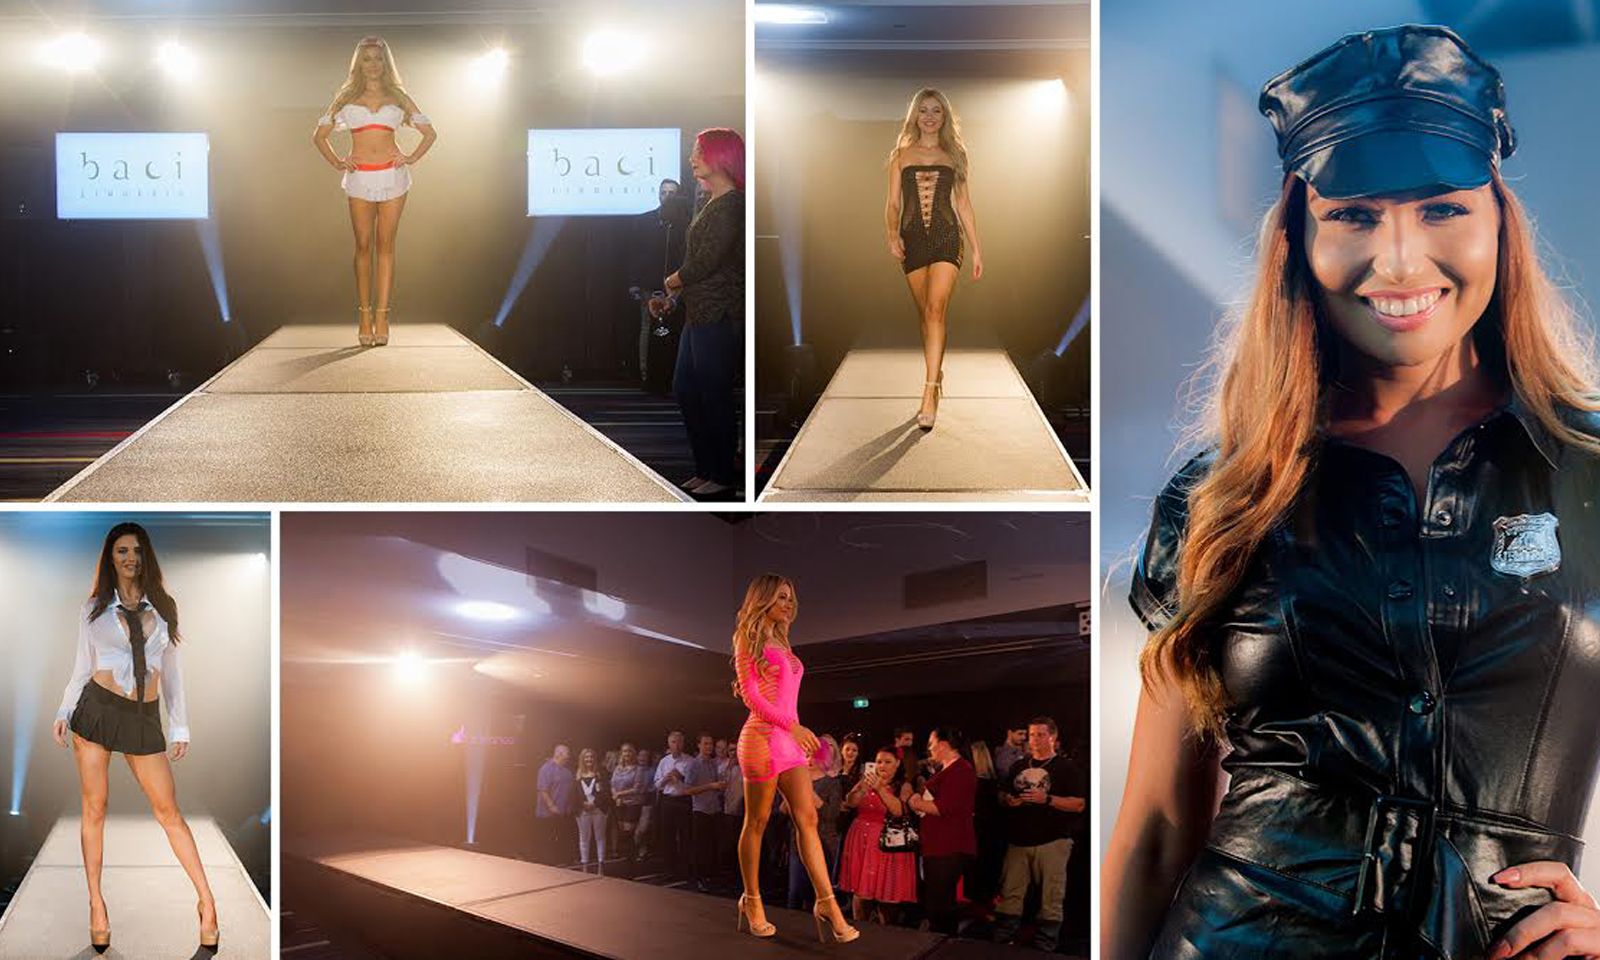 Adultex Fashion Show Features Baci, Lapdance, and Seven 'Til Midnight